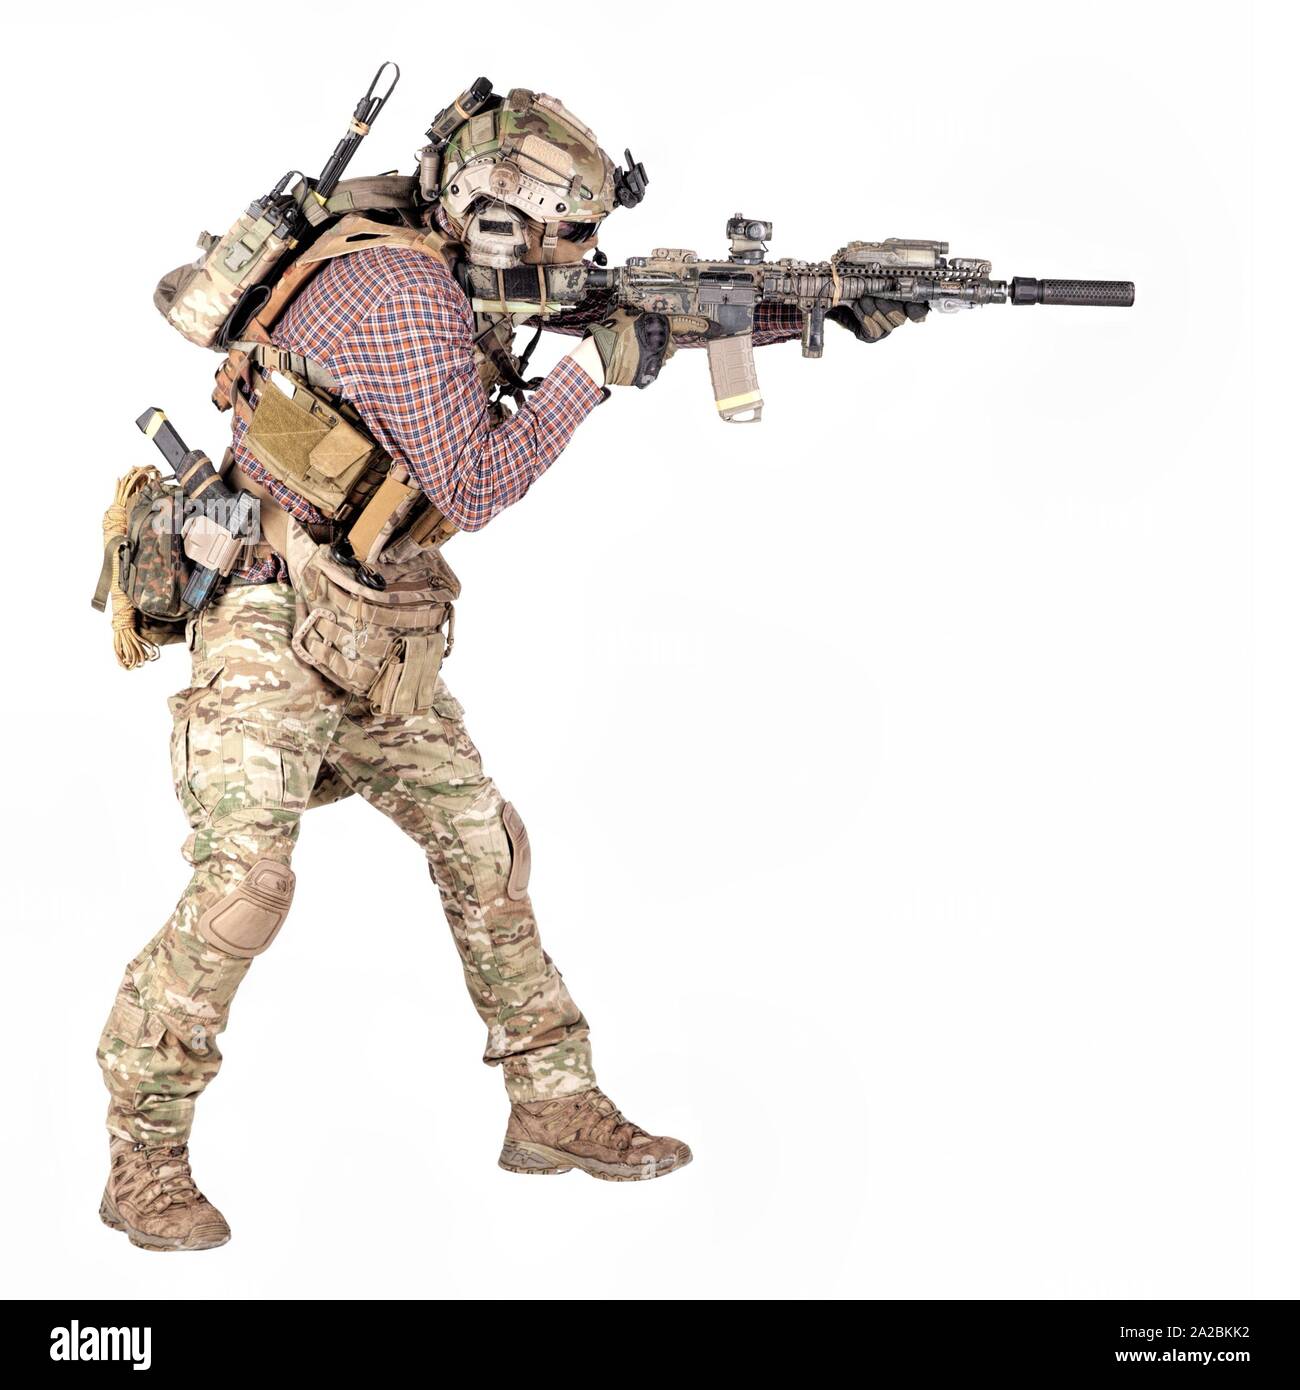 Full length portrait of airsoft player in checkered shirt, wearing camouflage uniform, helmet with tactical radio headset, body armour, aiming with Stock Photo